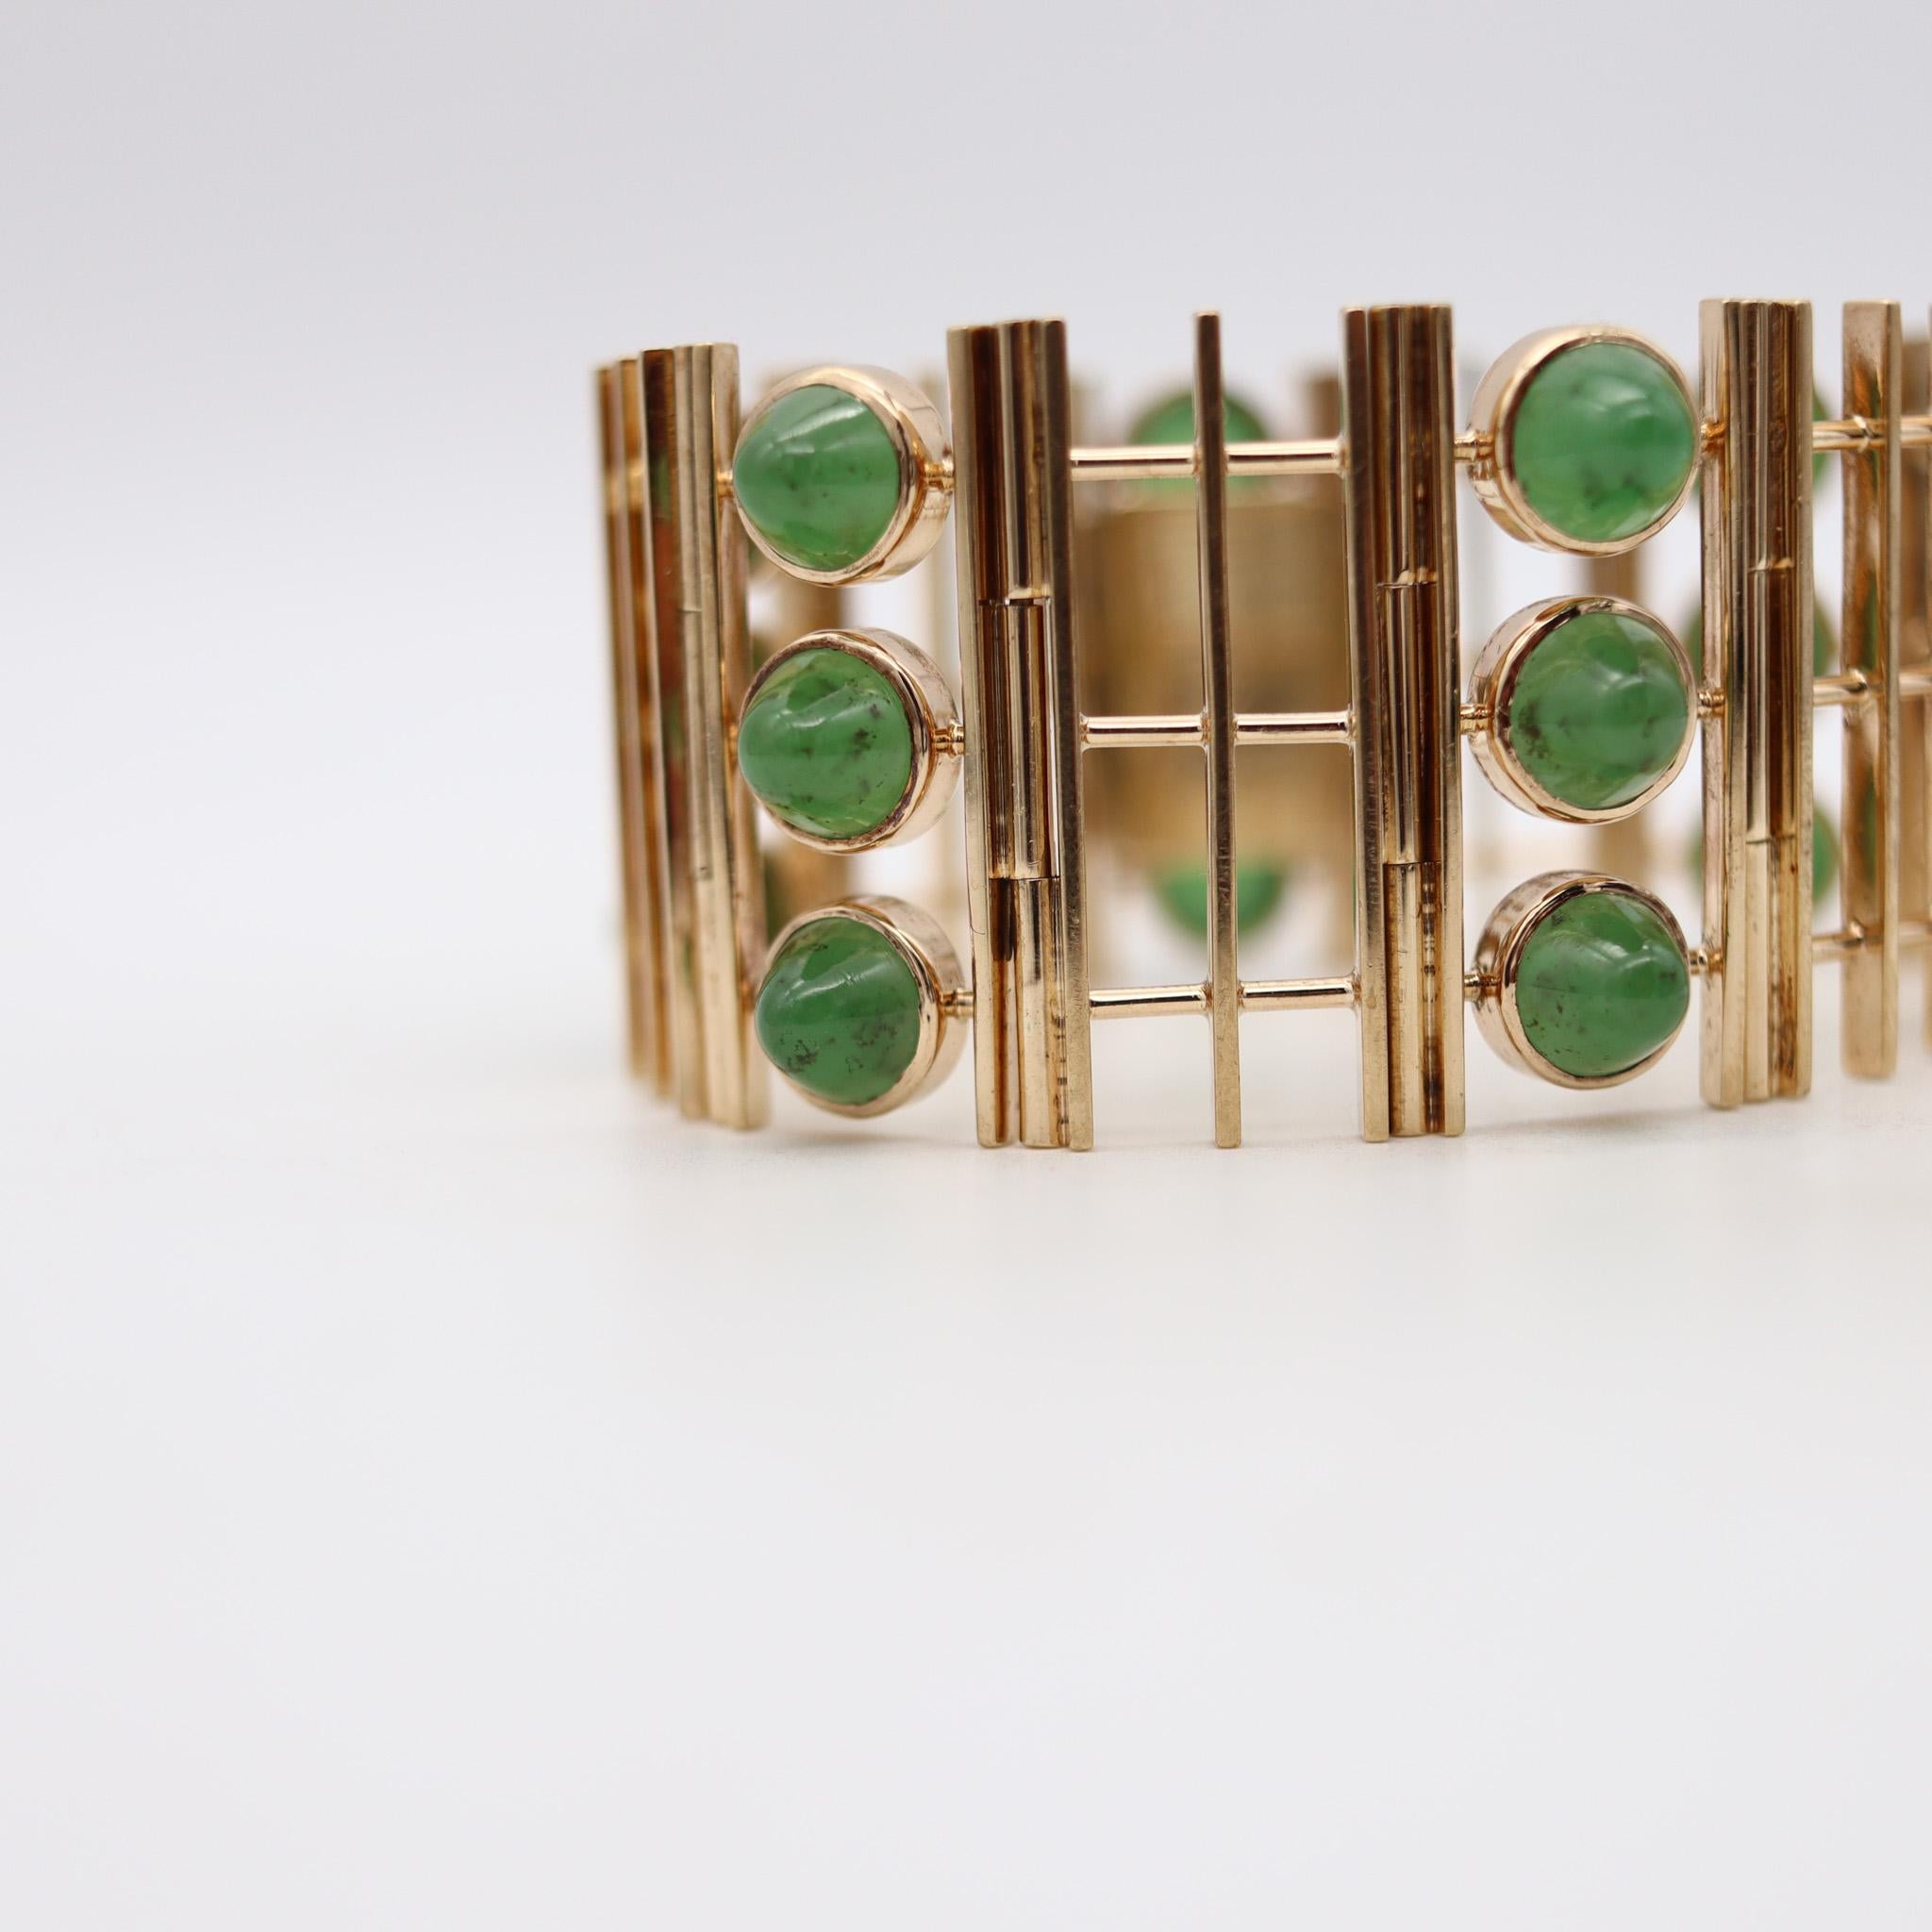 England Geometric Modernist Bracelet I 9Kt Gold With 45.18 Ctw In Nephrite Jade In Excellent Condition For Sale In Miami, FL